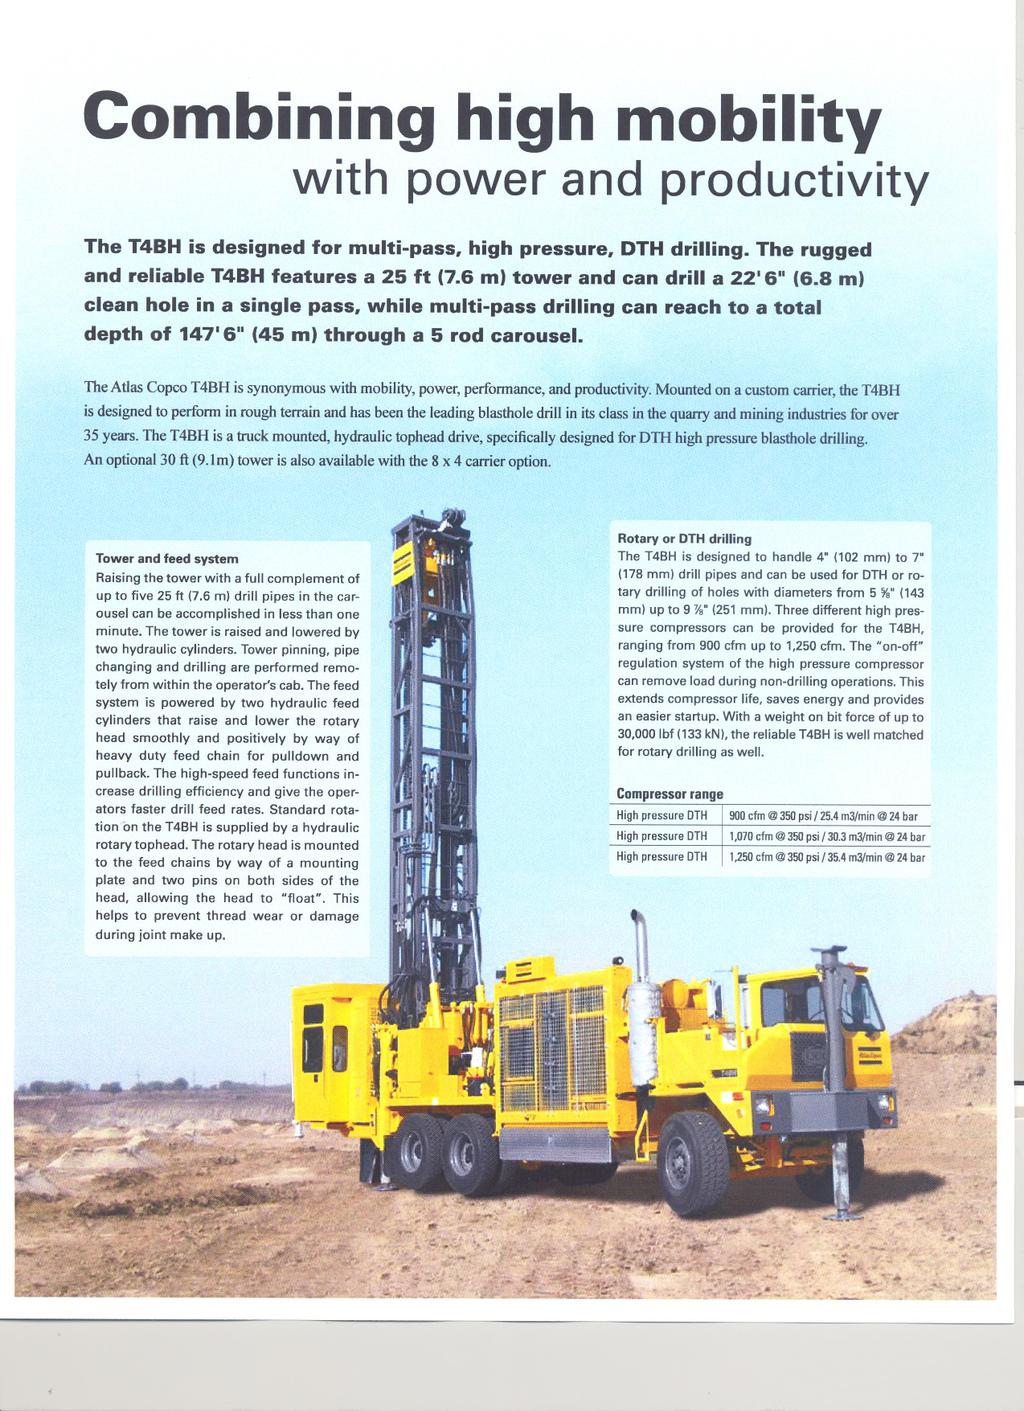 Combining high mobility with power and productivity The T4BH is designed for multipass, high pressure, DTH drilling The rugged and reliable T4BH features a 25 ft (76 m) tower and can drill a 2216"